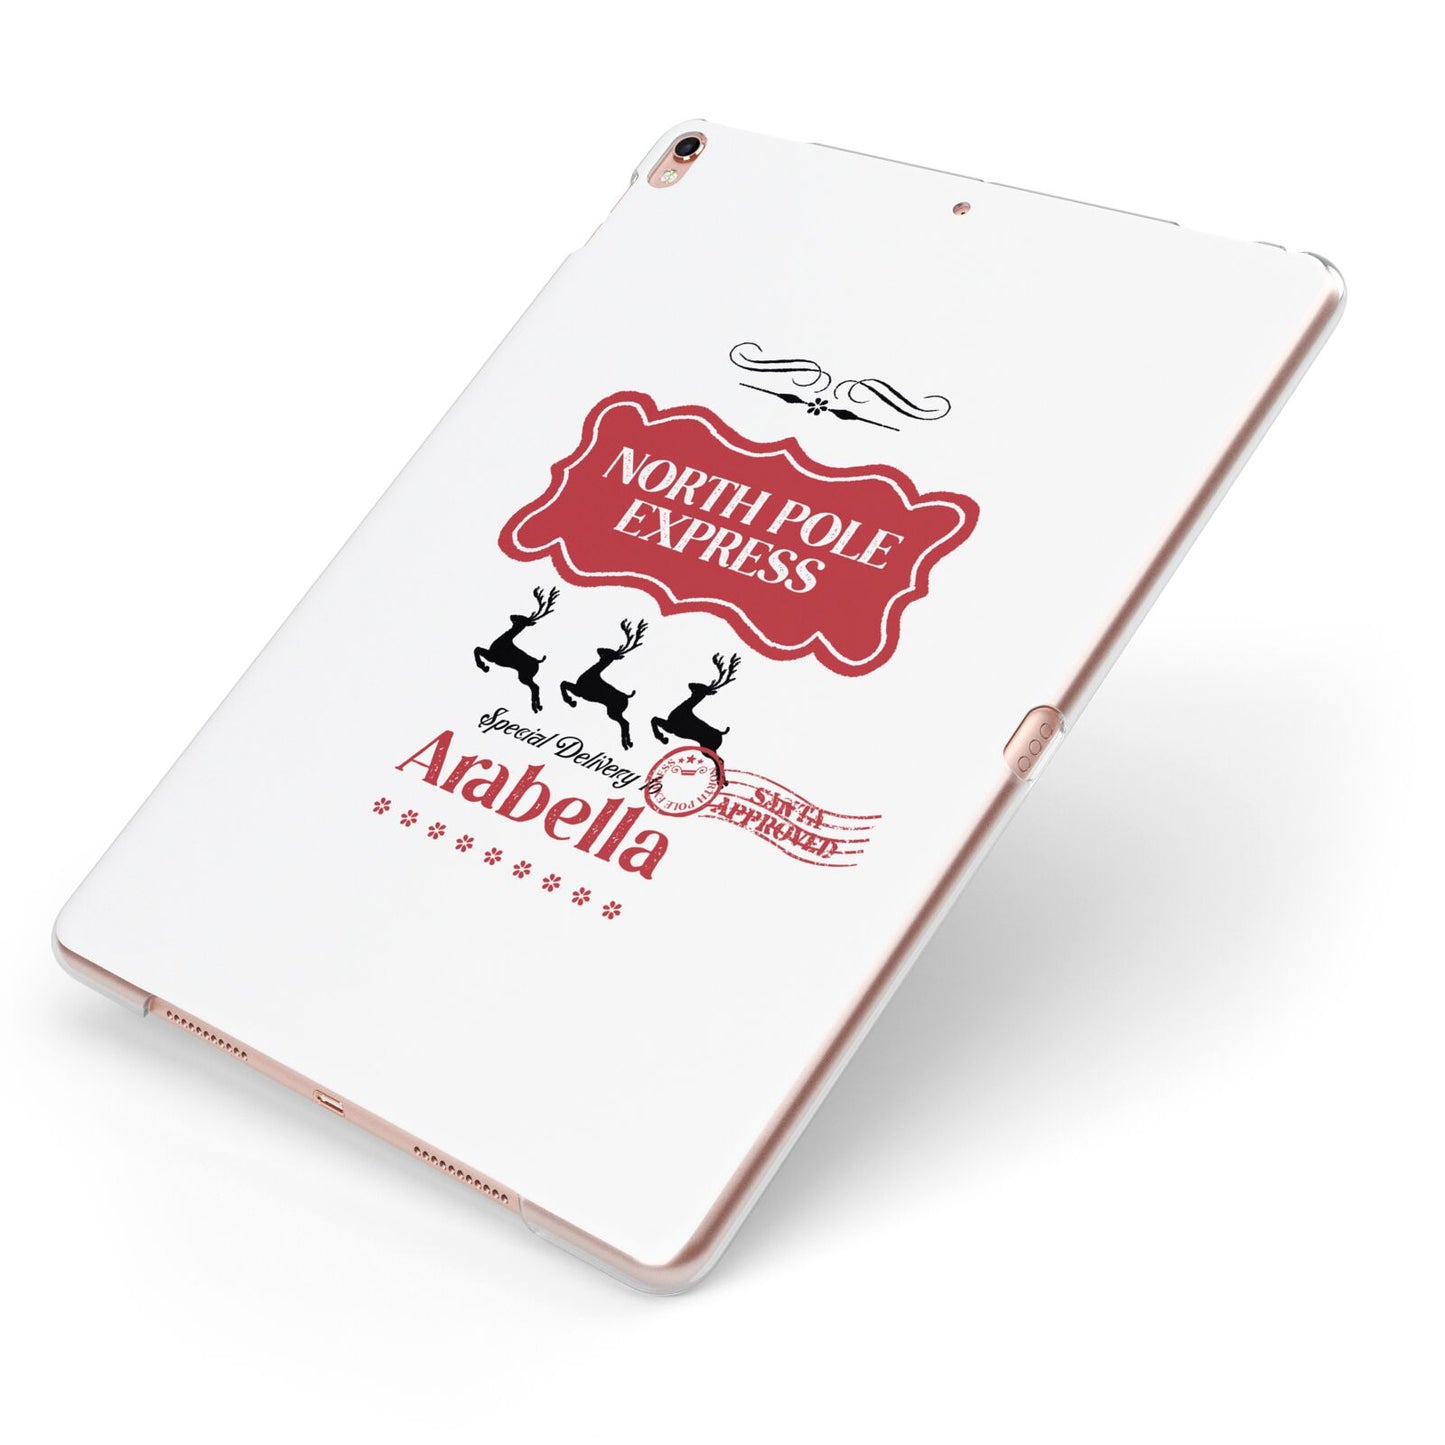 North Pole Express Personalised Apple iPad Case on Rose Gold iPad Side View